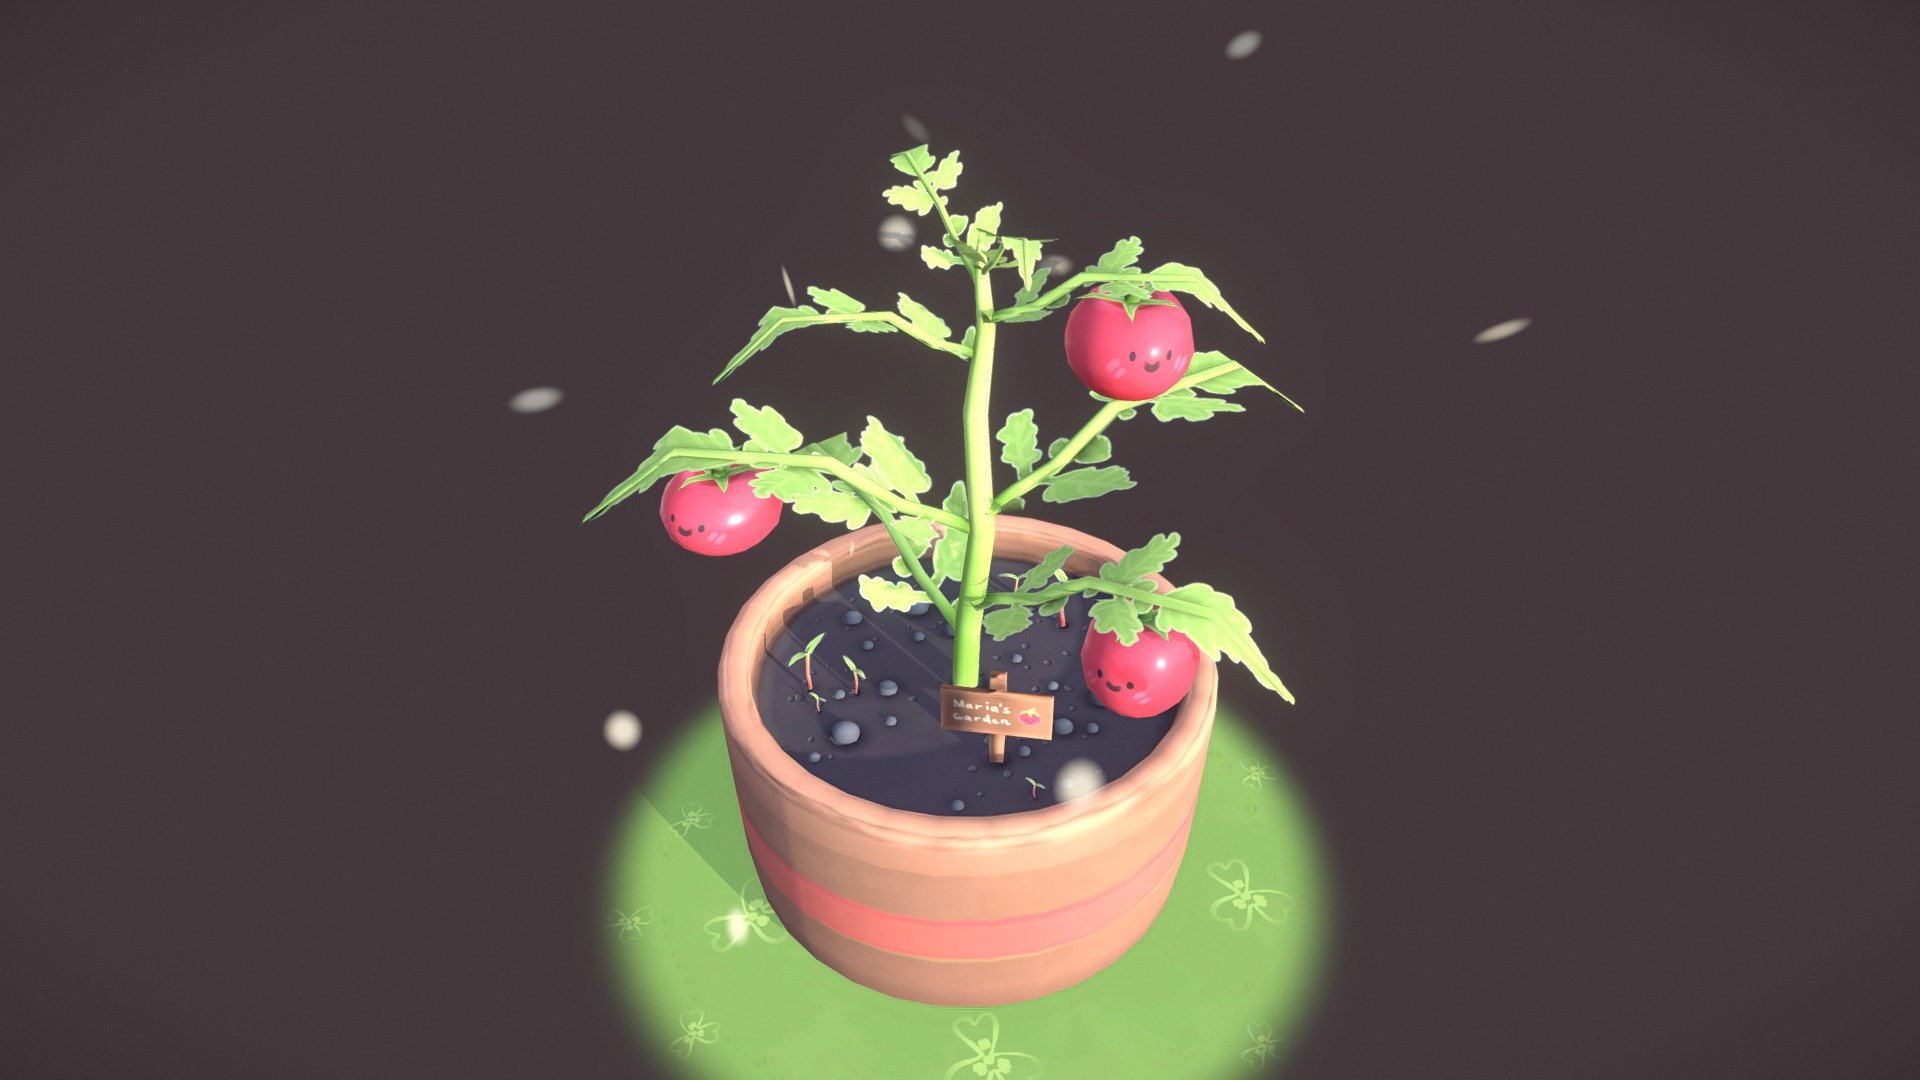 This was a comission I did for Angel Rubio for his girlfriend's birthday :) Thanks for letting me make cute tomato bois!

Comission contact: contact@tinyworlds.org - Cute Tomato Plant - 3D model by Rick Hoppmann (@tinyruin) 3d model